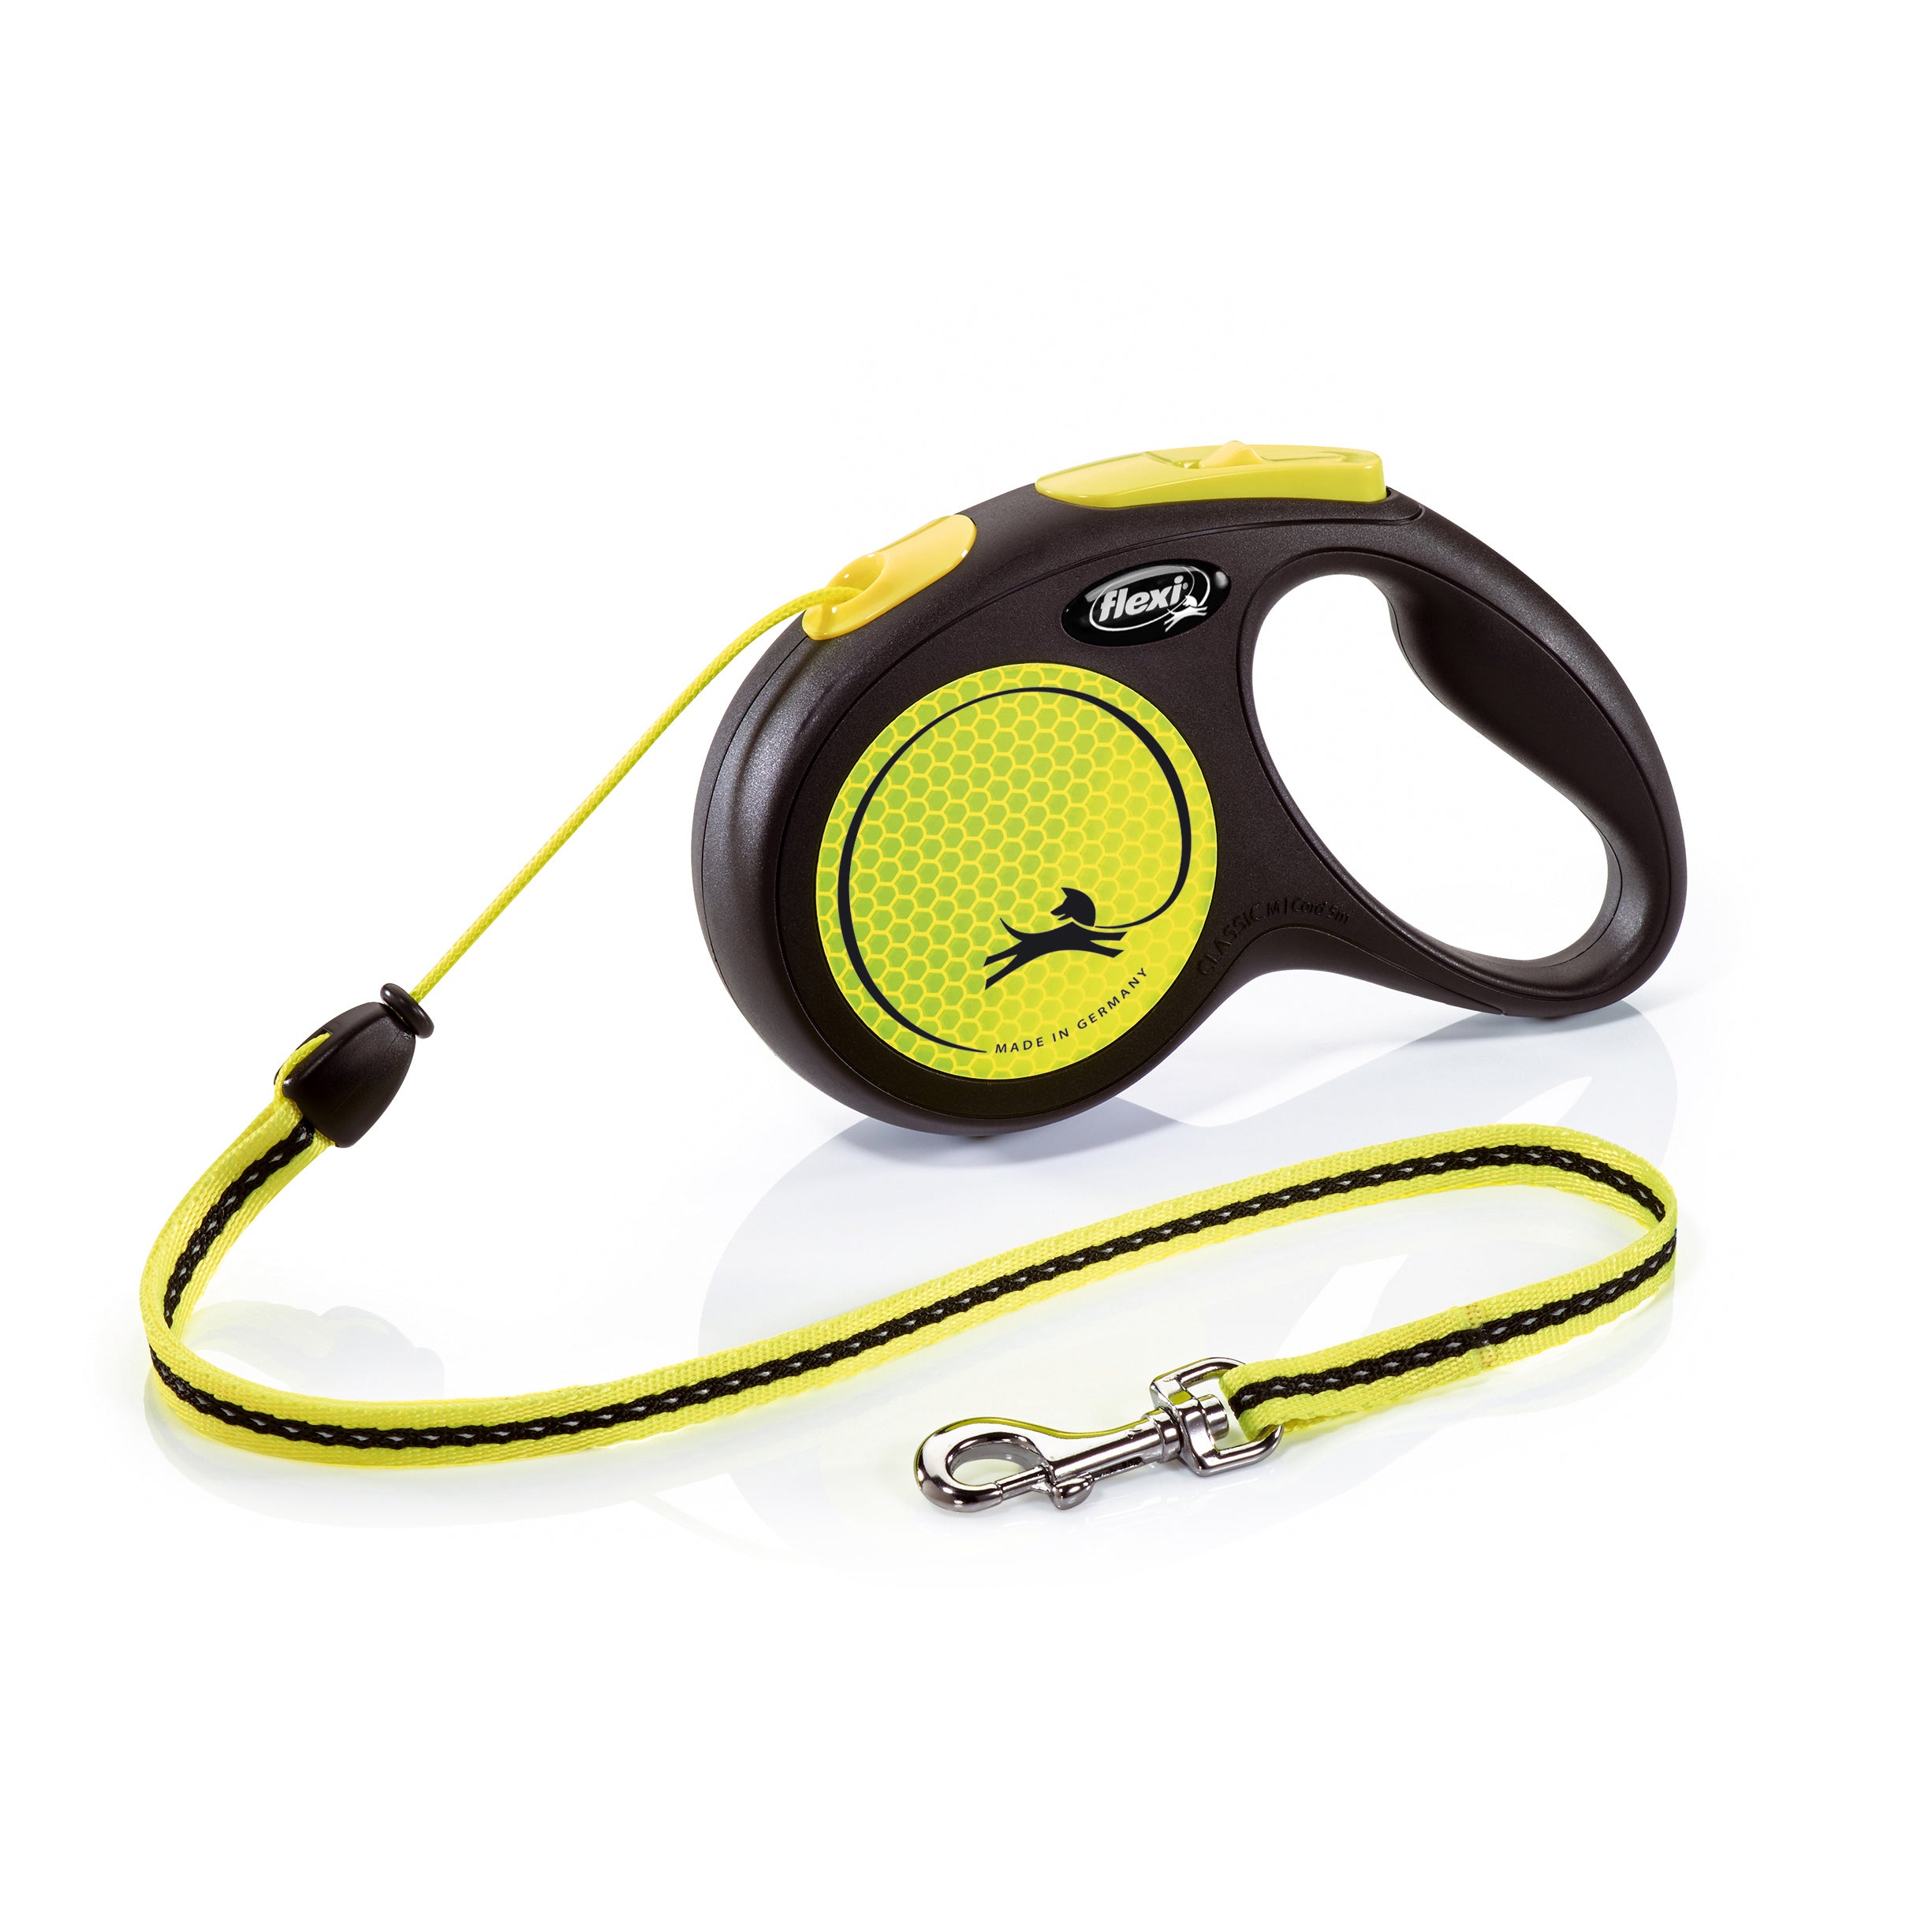 Image of Flexi Neon Retractable Dog Lead - Black/Yellow - Large Tape